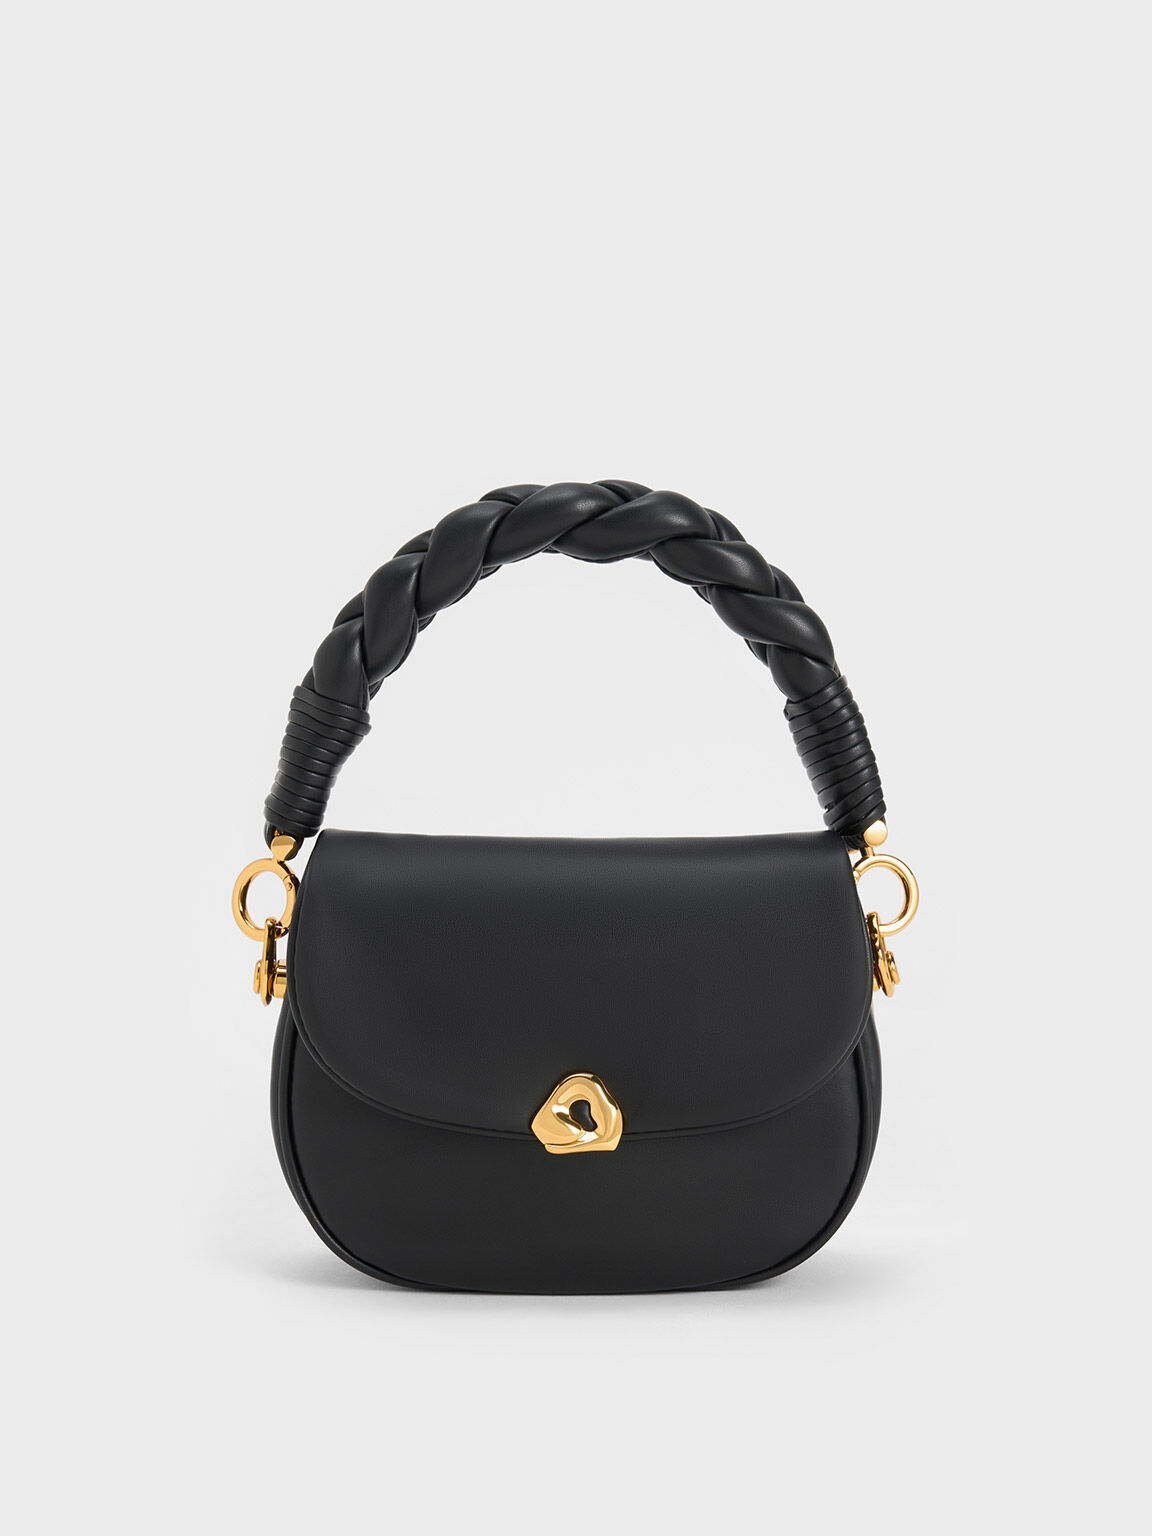 Women’s New Arrival Bags | Latest Styles | CHARLES & KEITH IT